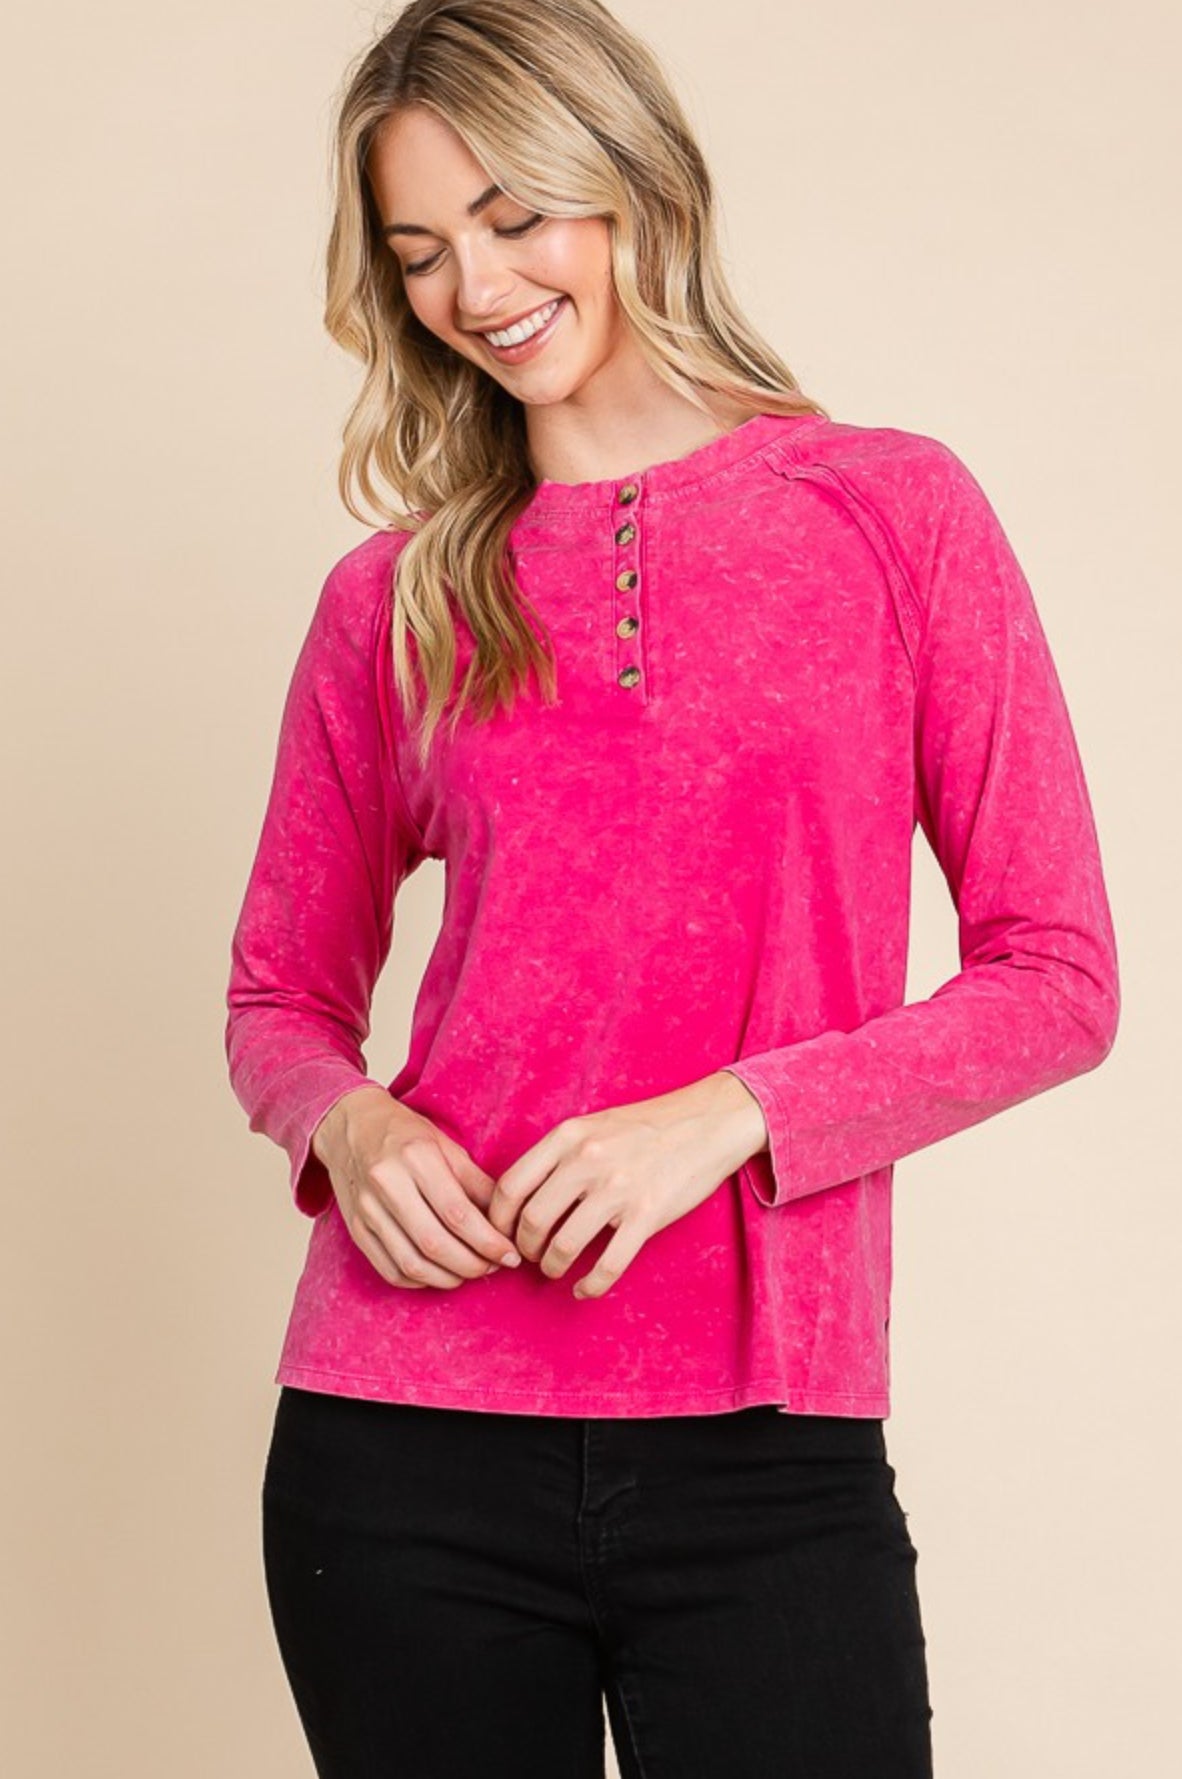 Soft Button Not-So-Basic Long Sleeve Top